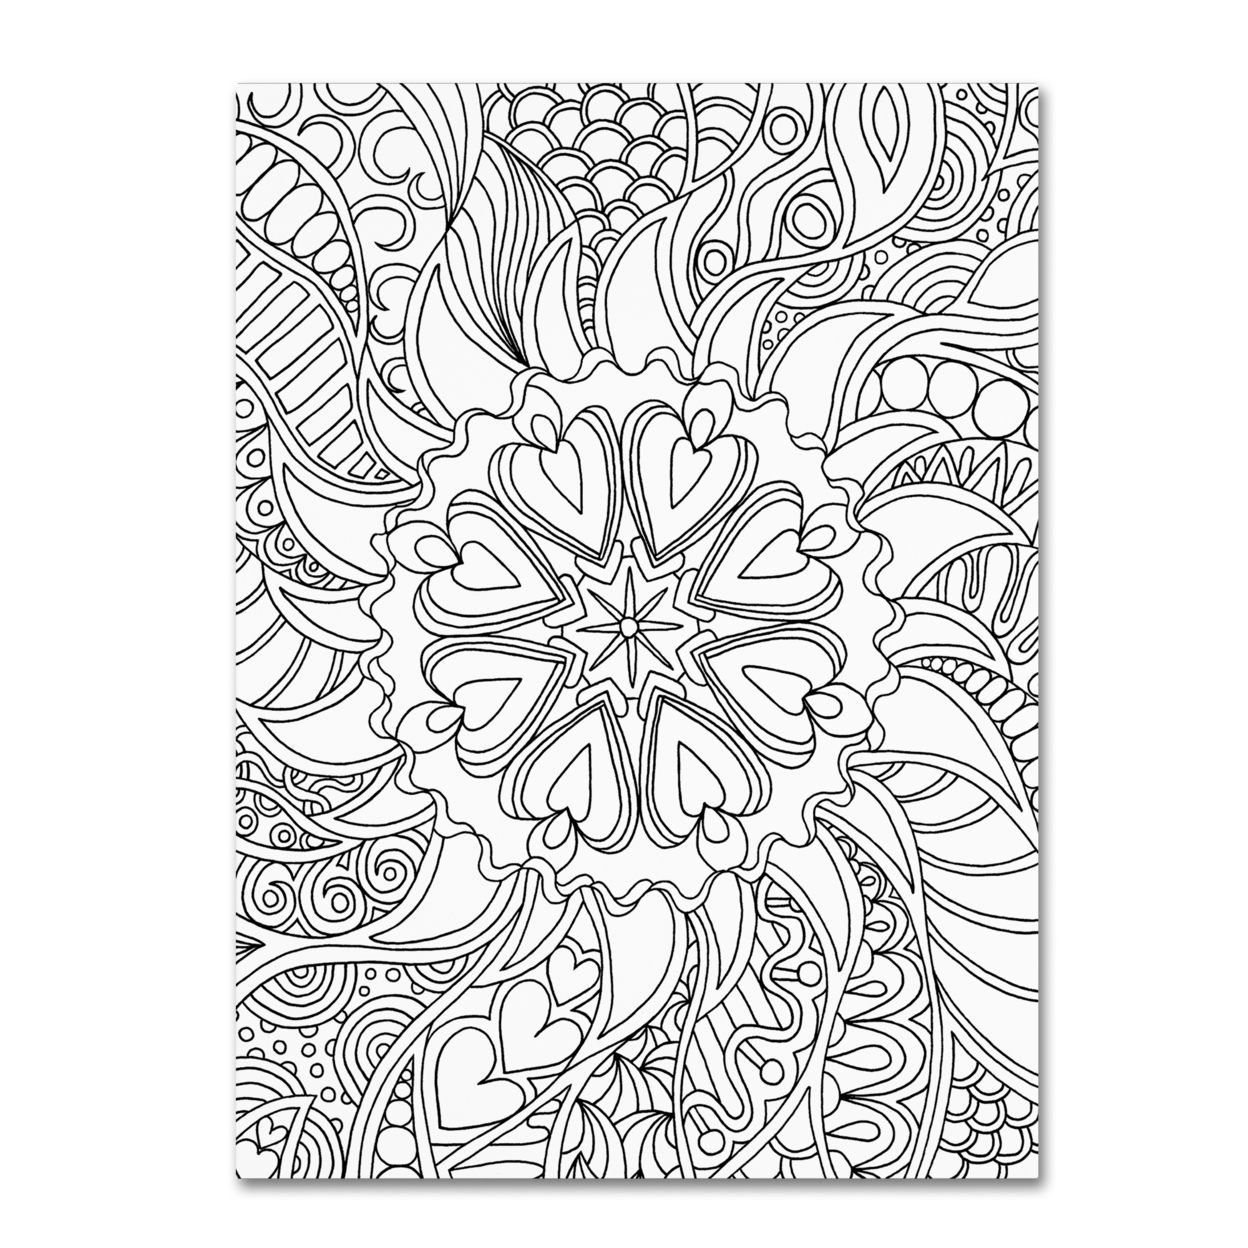 Kathy G. Ahrens 'Mixed Coloring Book 61' Canvas Wall Art 35 X 47 Inches